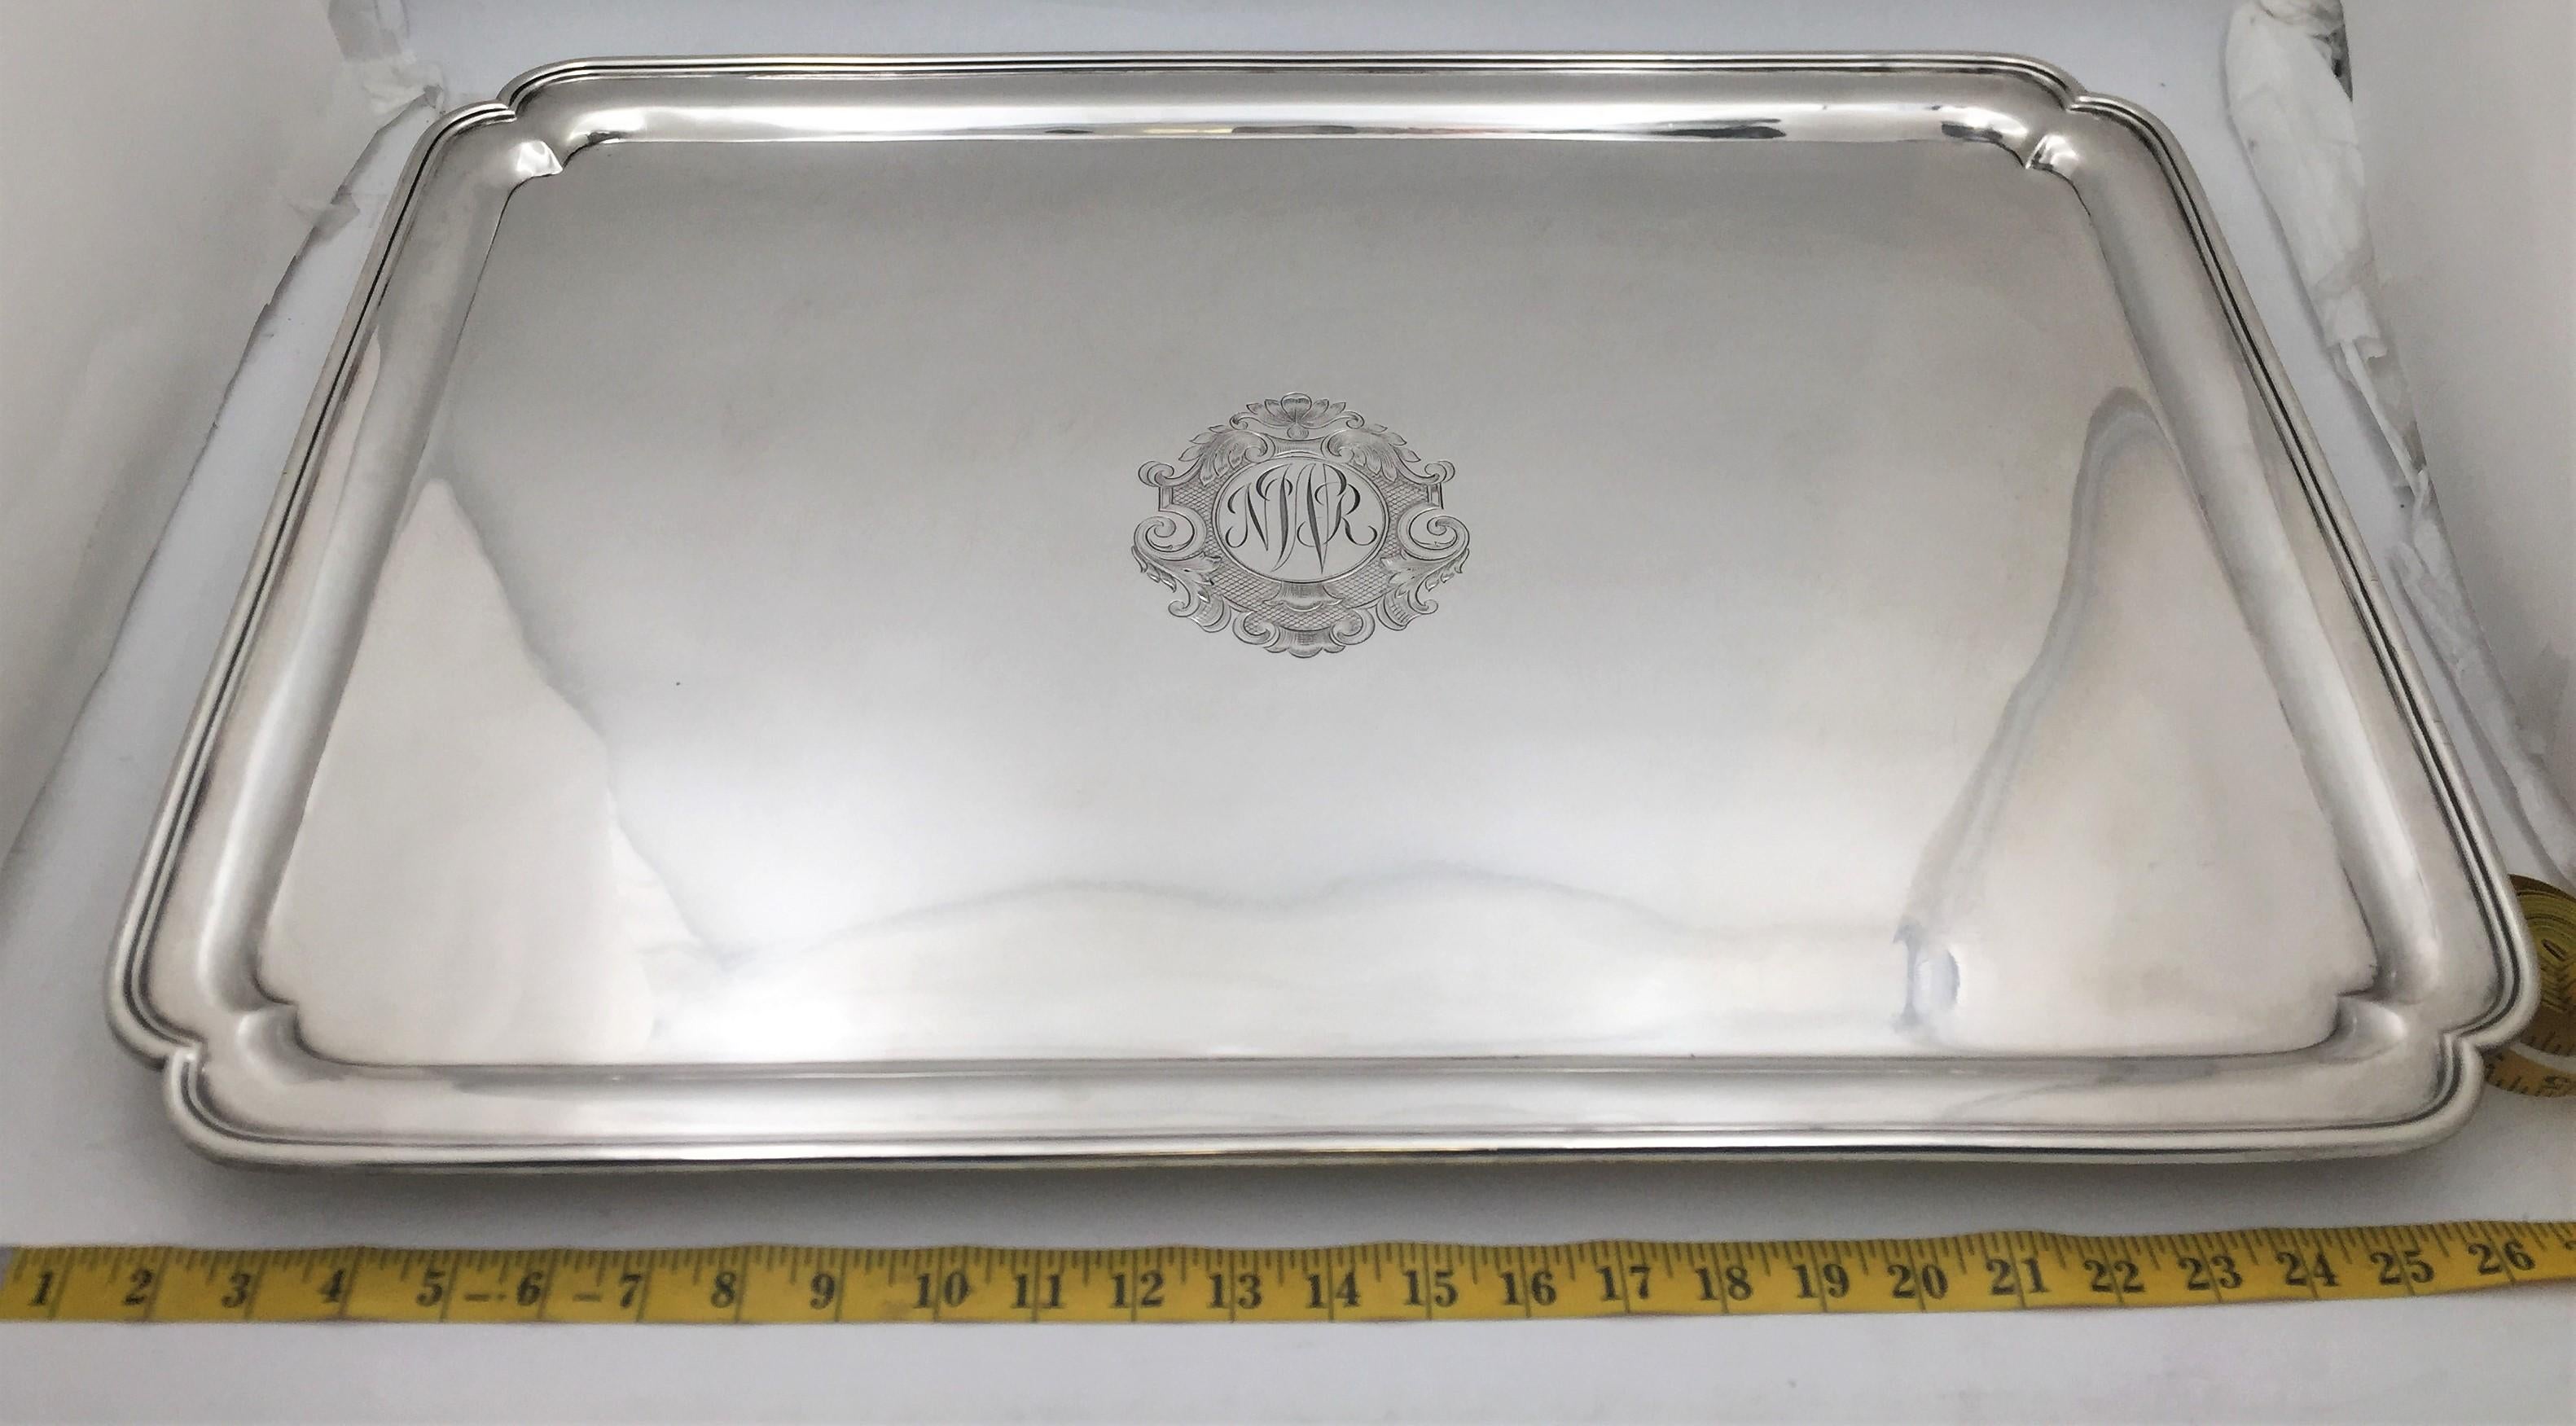 Oversized, one-of-a-kind, massive Crichton & Co. sterling silver tray in Art Deco style from 1927 with a molded rim, standing on four bracket feet, measuring 26'' in length by 18'' in width by 1 1/2'' in height, weighing an impressive 190 troy